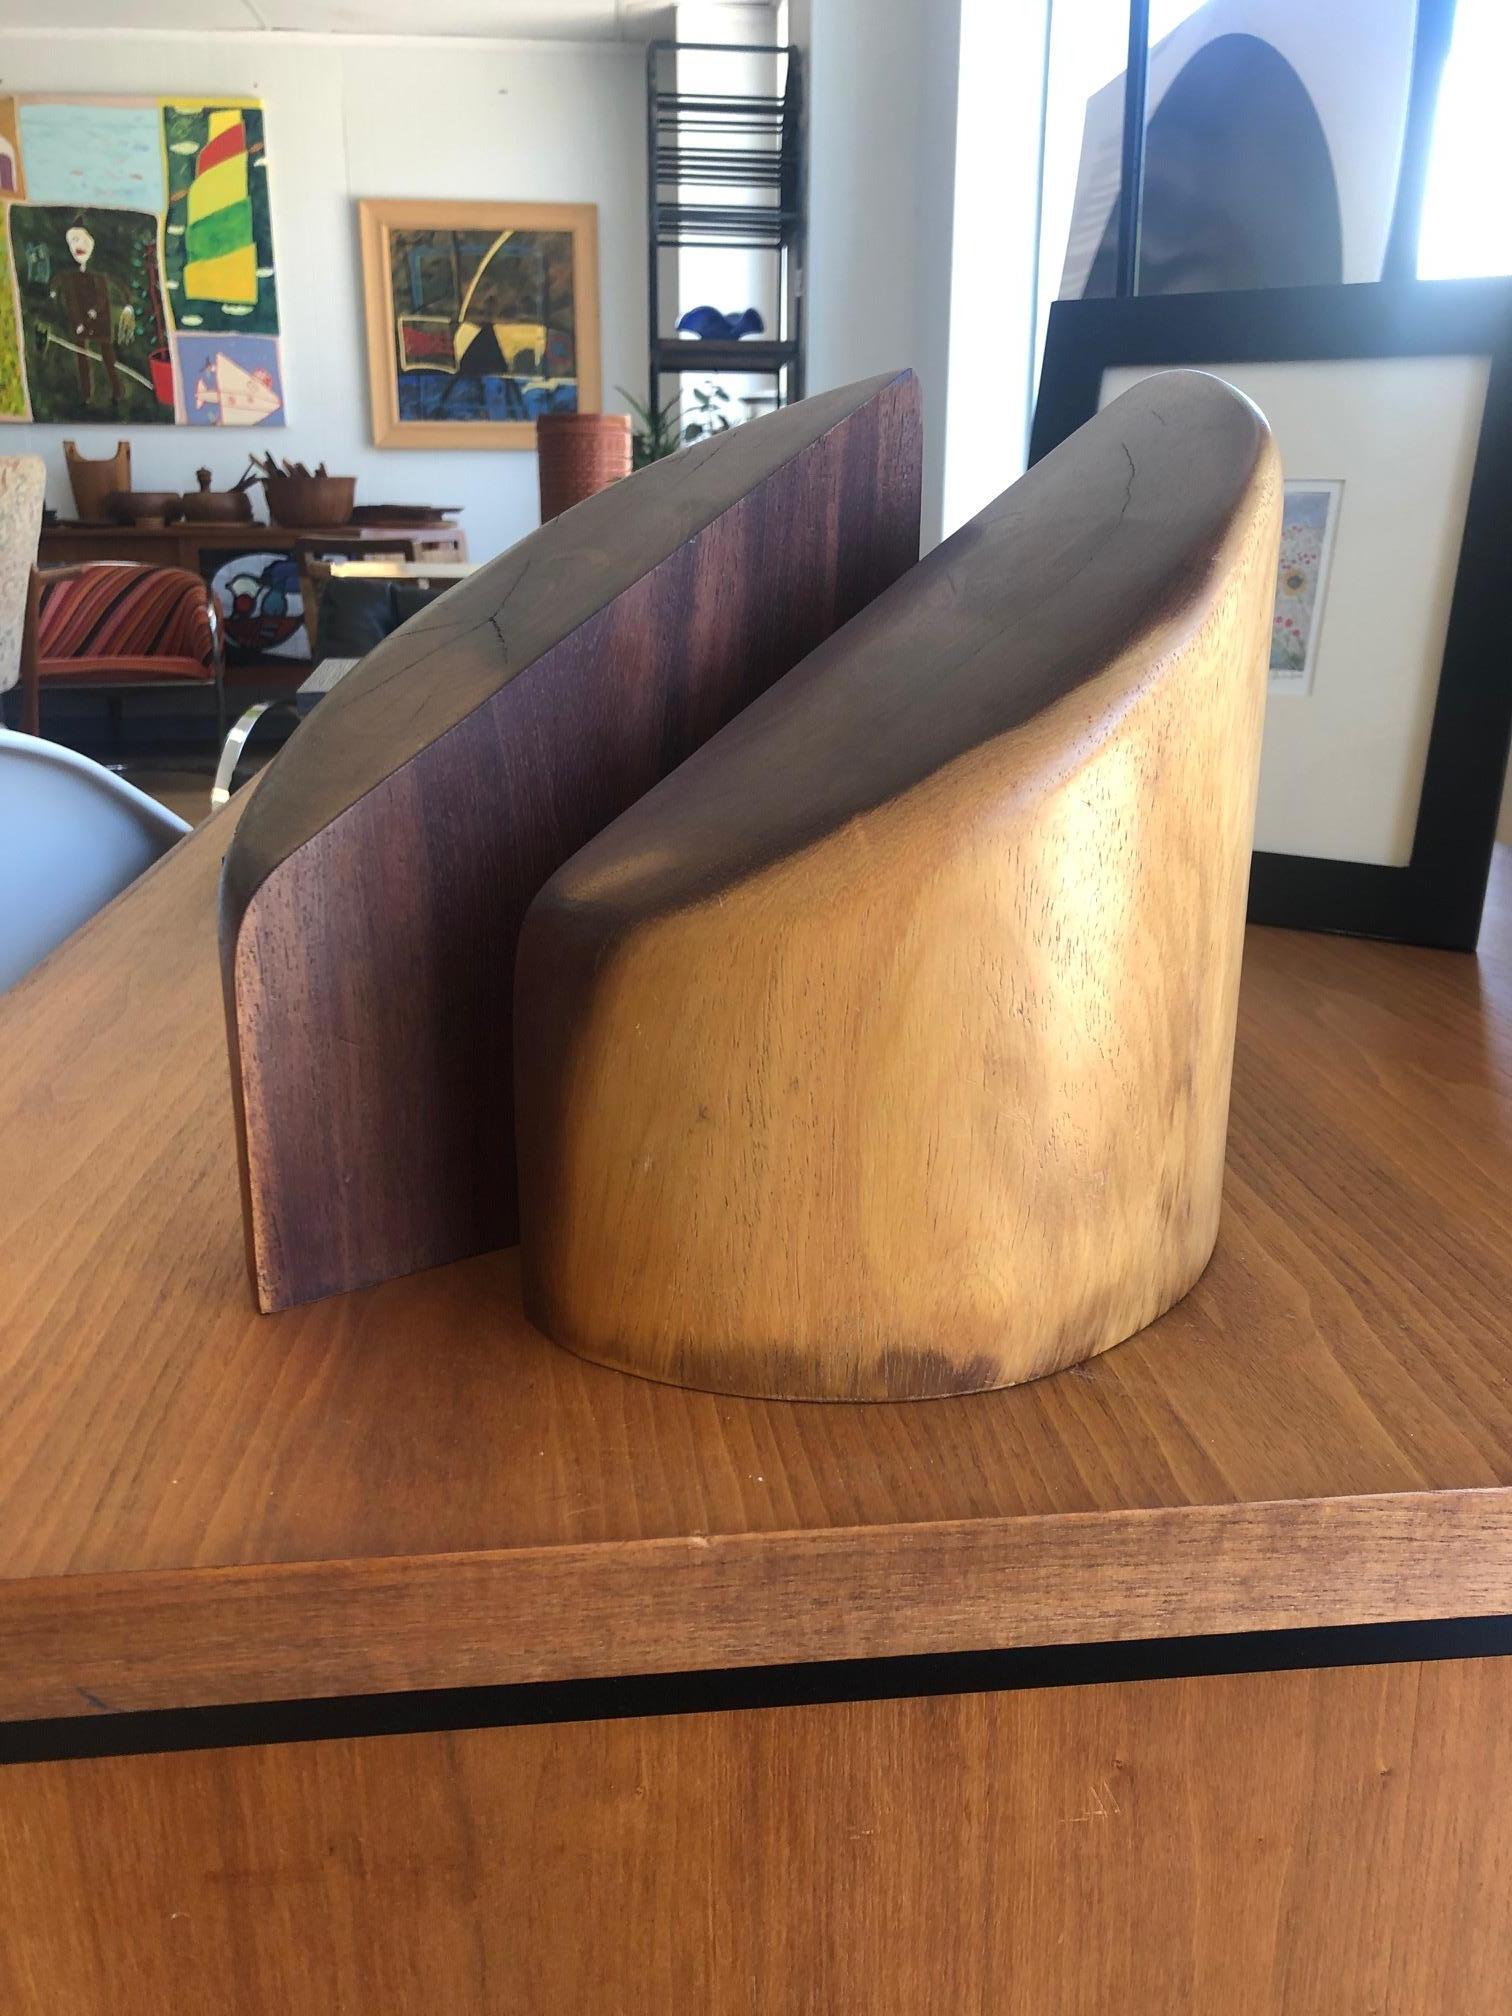 This vintage pair of bookends by Don Shoemaker are in overall good condition. Gorgeous light and dark wood tones. Solid and heavyweight, these bookends can hold strong. A beautiful addition to any room.
circa 1960s.
Dimensions:
9.5